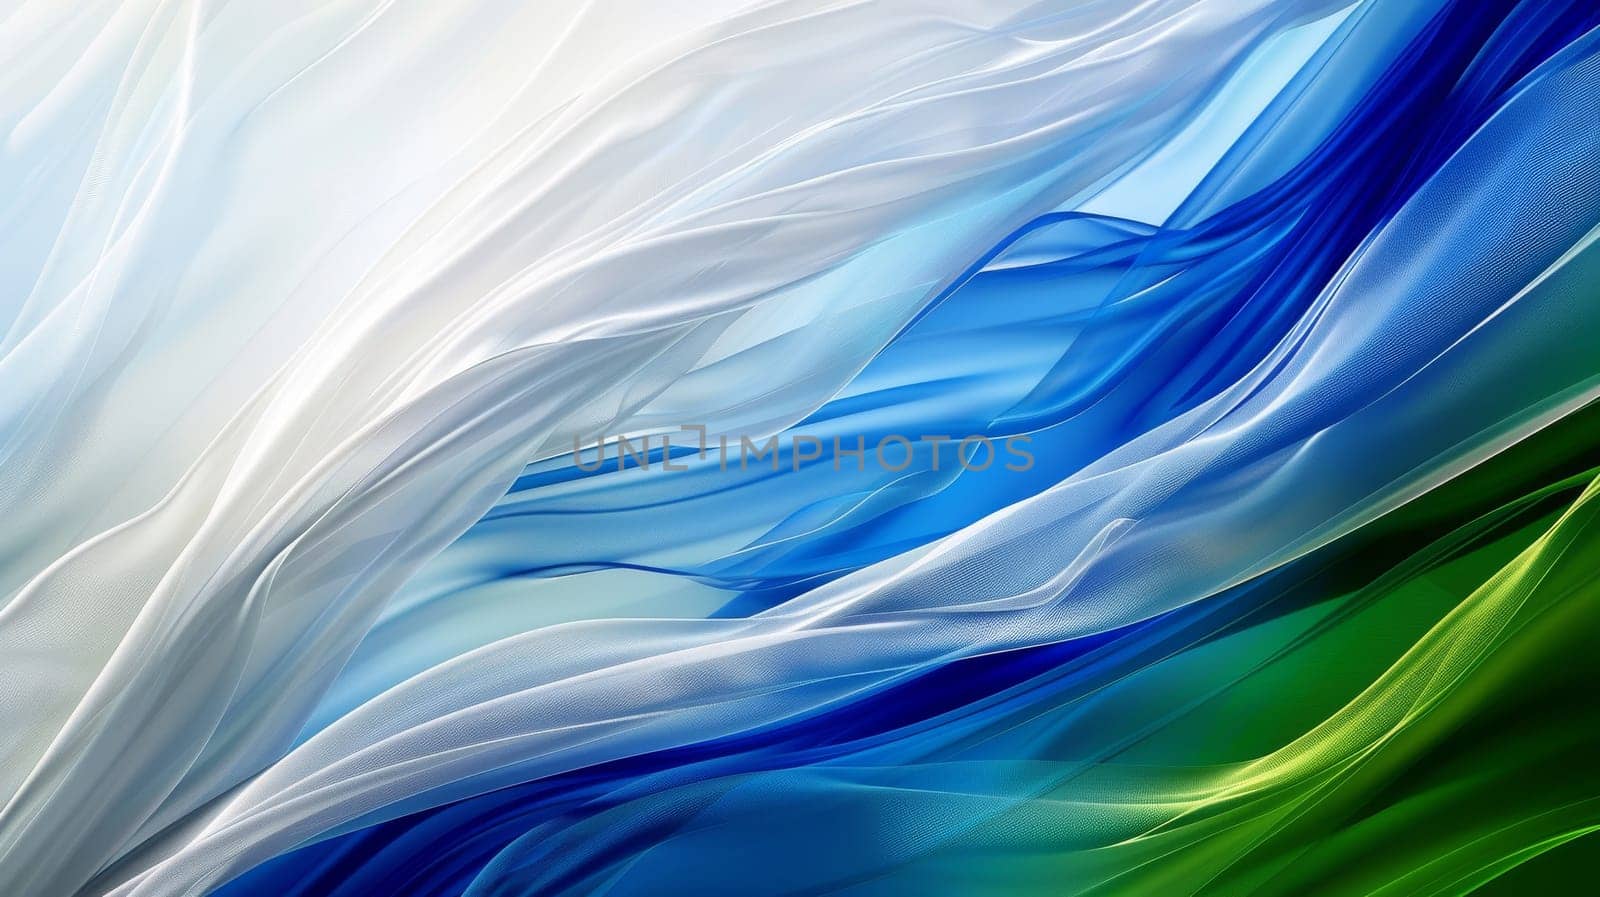 A blue and white striped fabric with a green stripe. background or wallpaper.